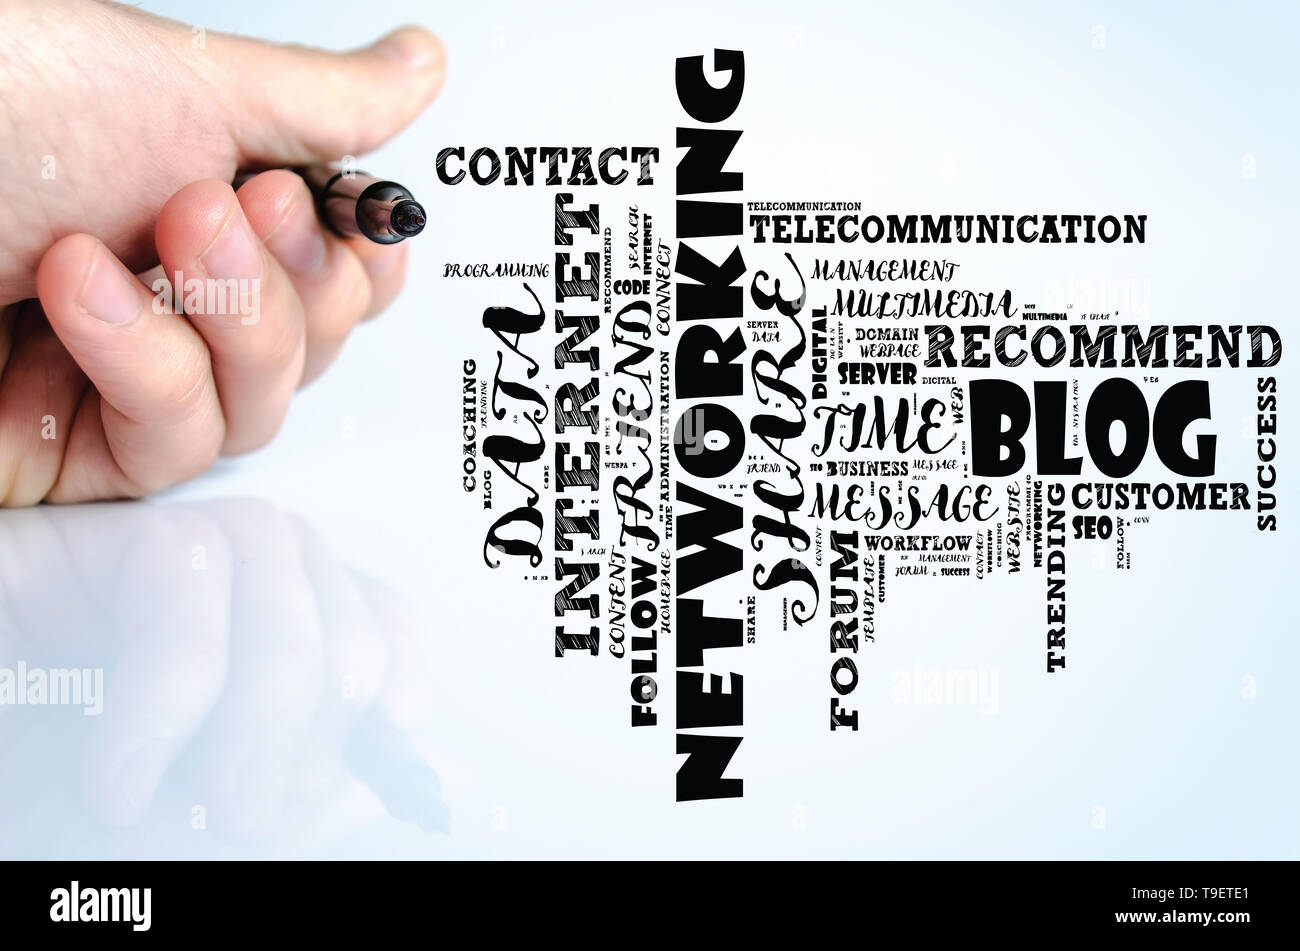 Blog word cloud collage over white background Stock Photo